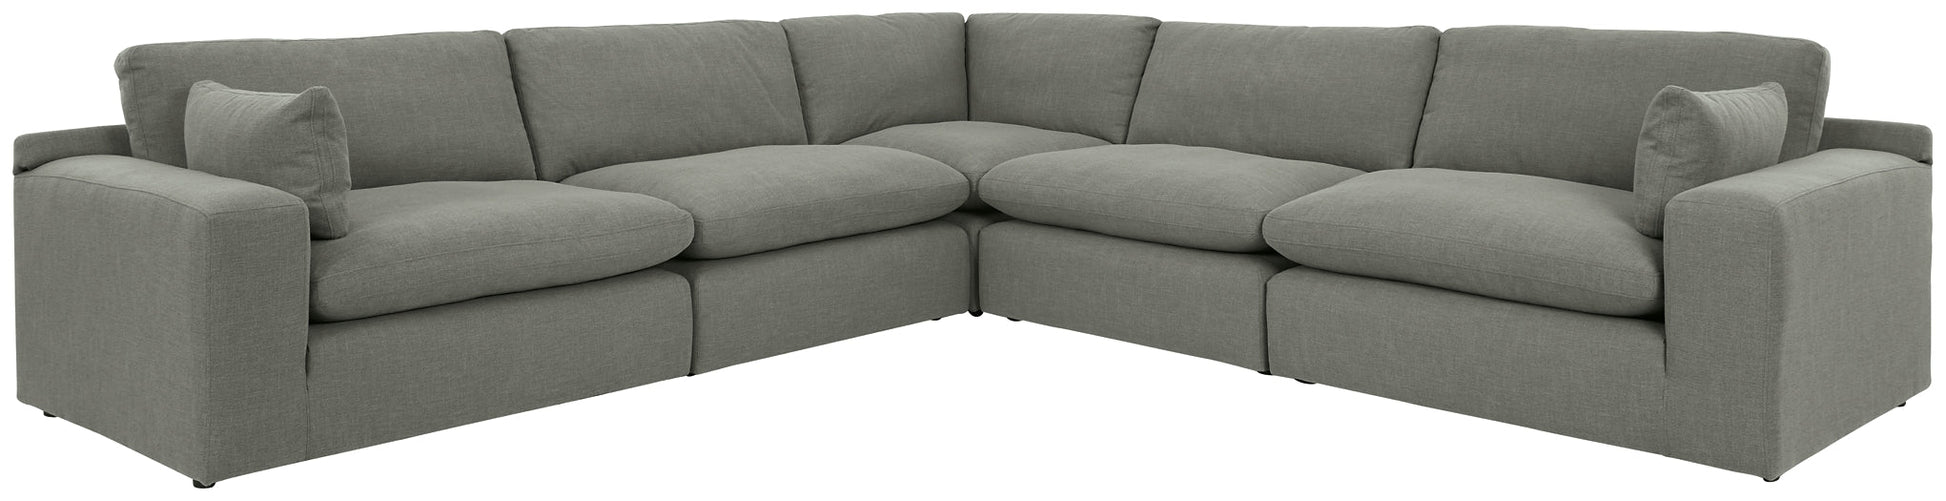 Elyza 5-Piece Sectional with Ottoman at Walker Mattress and Furniture Locations in Cedar Park and Belton TX.